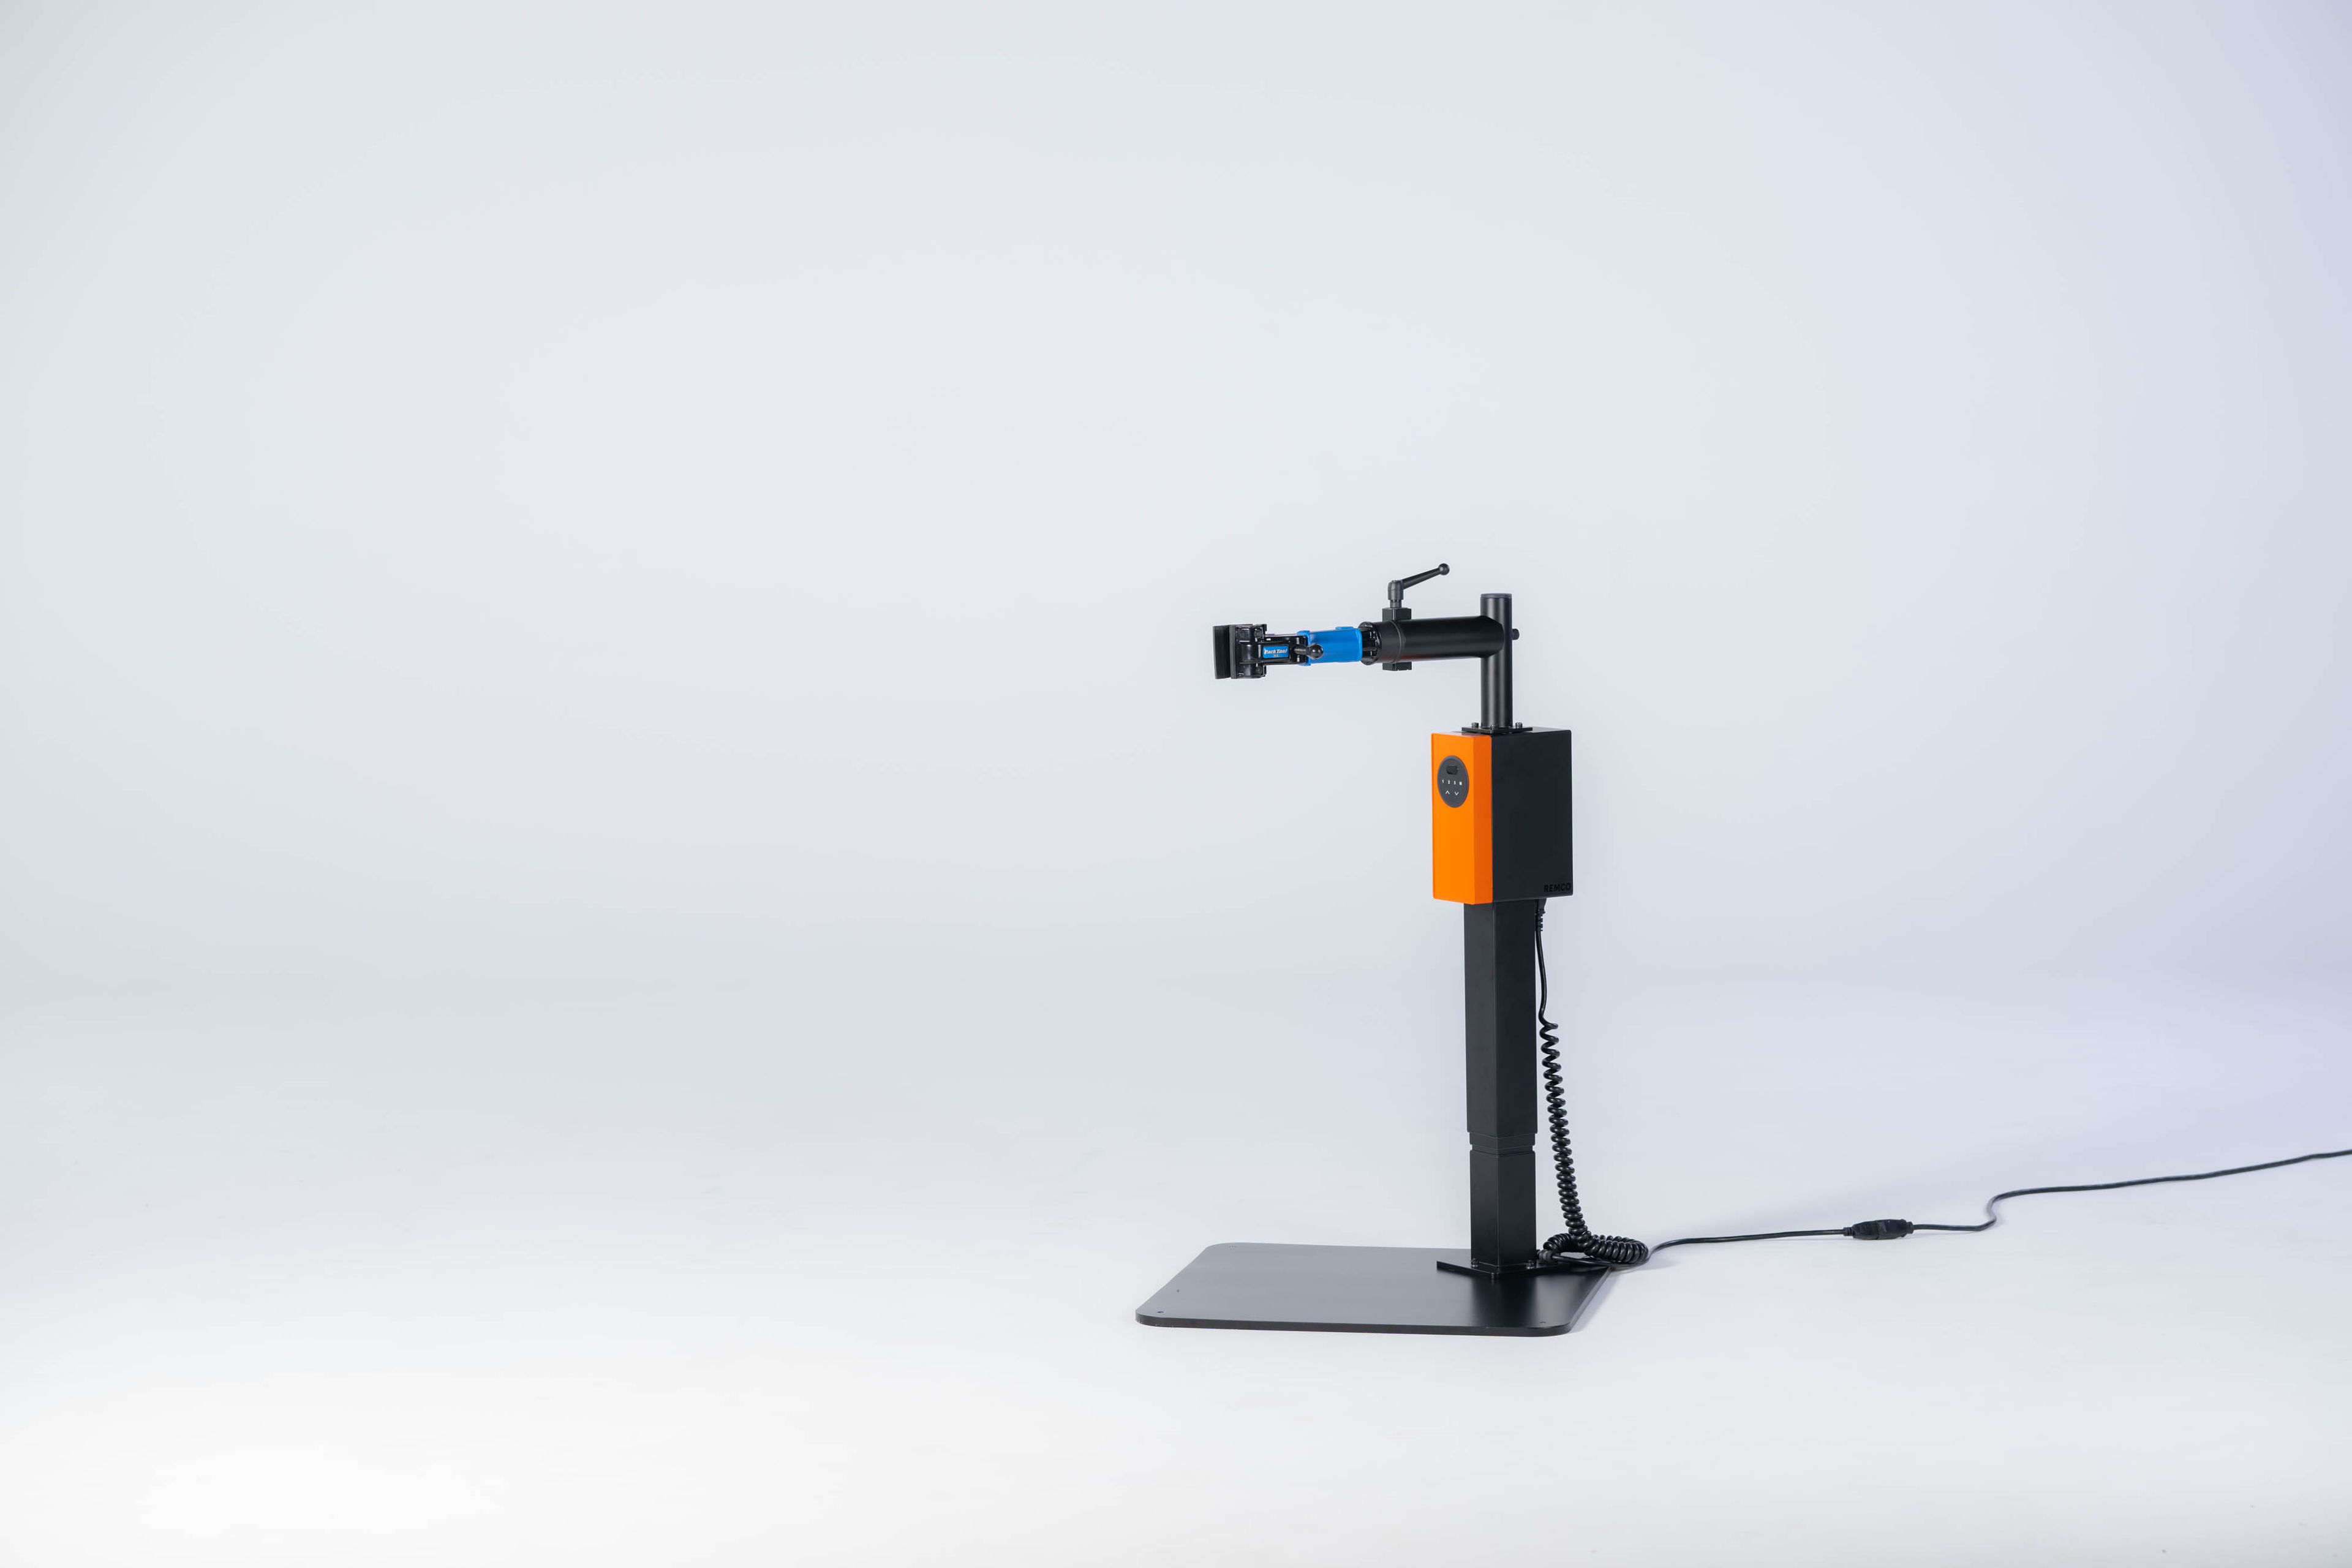 Introducing REMCO Tools: Innovative and Powerful Bike Lift System 